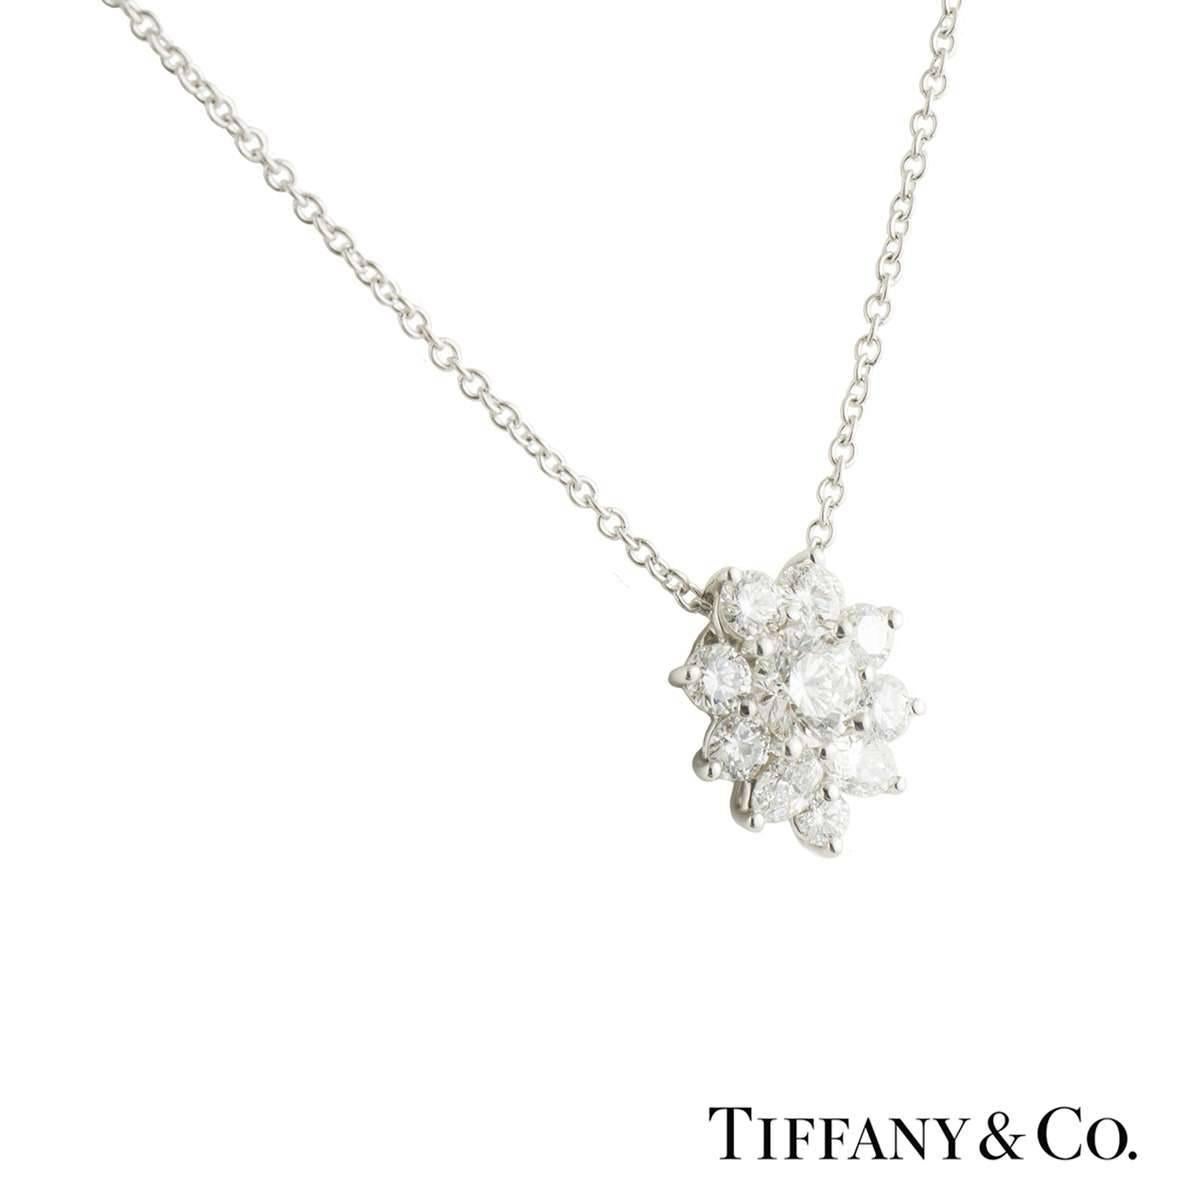 A beautiful Tiffany & Co. diamond pendant in platinum. The pendant comprises of a round brilliant cut diamond set to the centre with an approximate weight of 0.30ct, G colour and VVS2 clarity. Complimenting this are 2 pear cut diamonds with 7